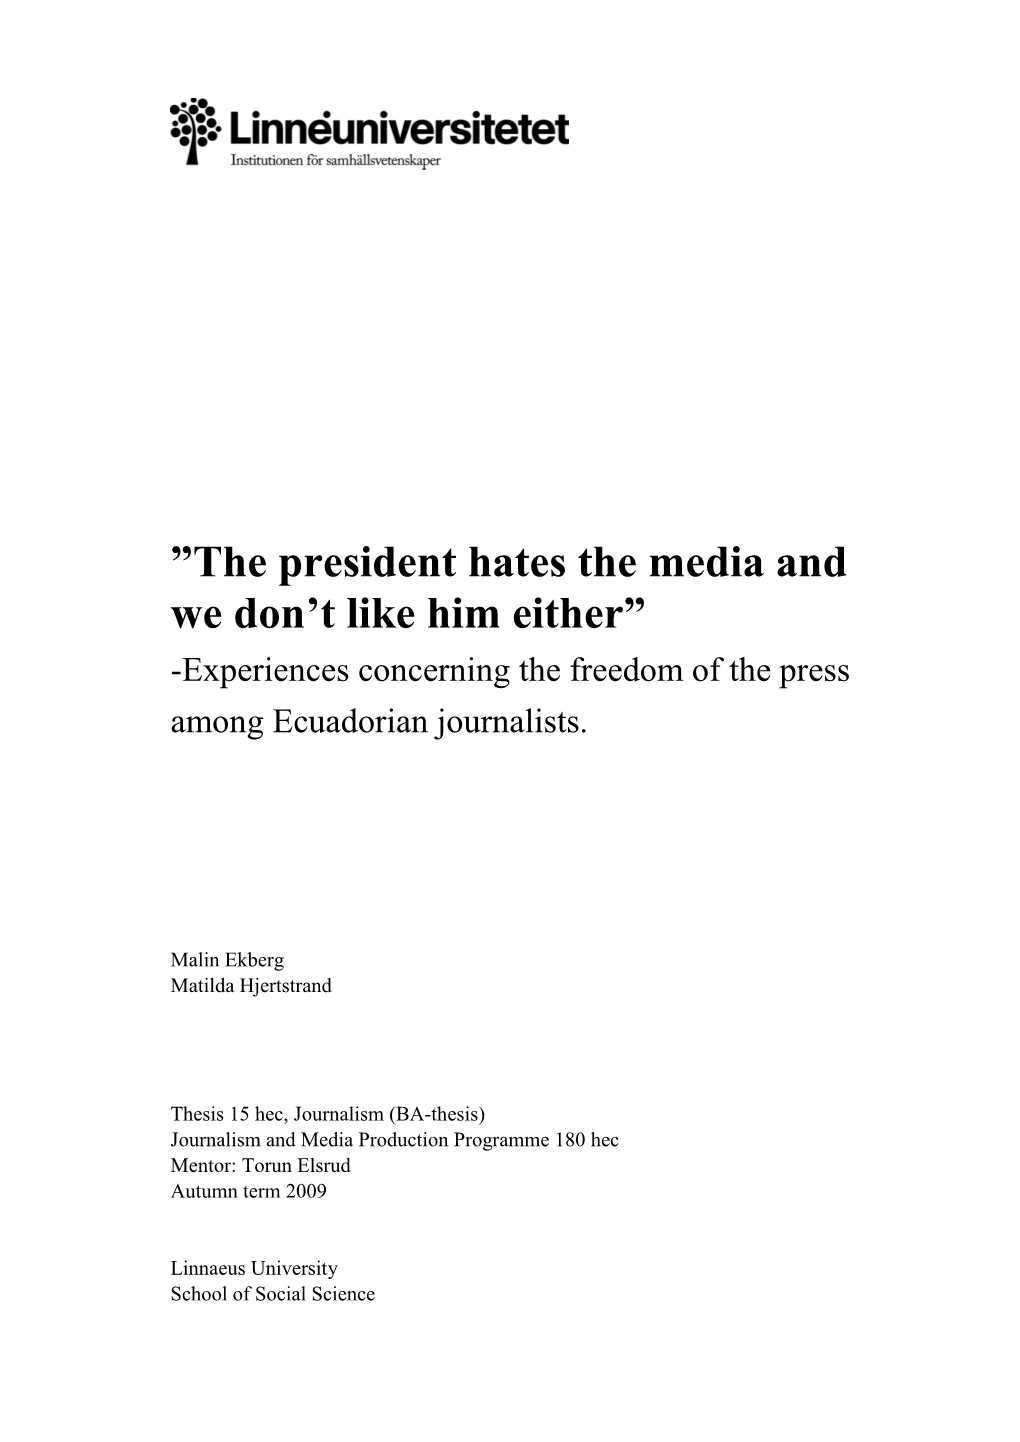 The President Hates the Media and We Don't Like Him Either”